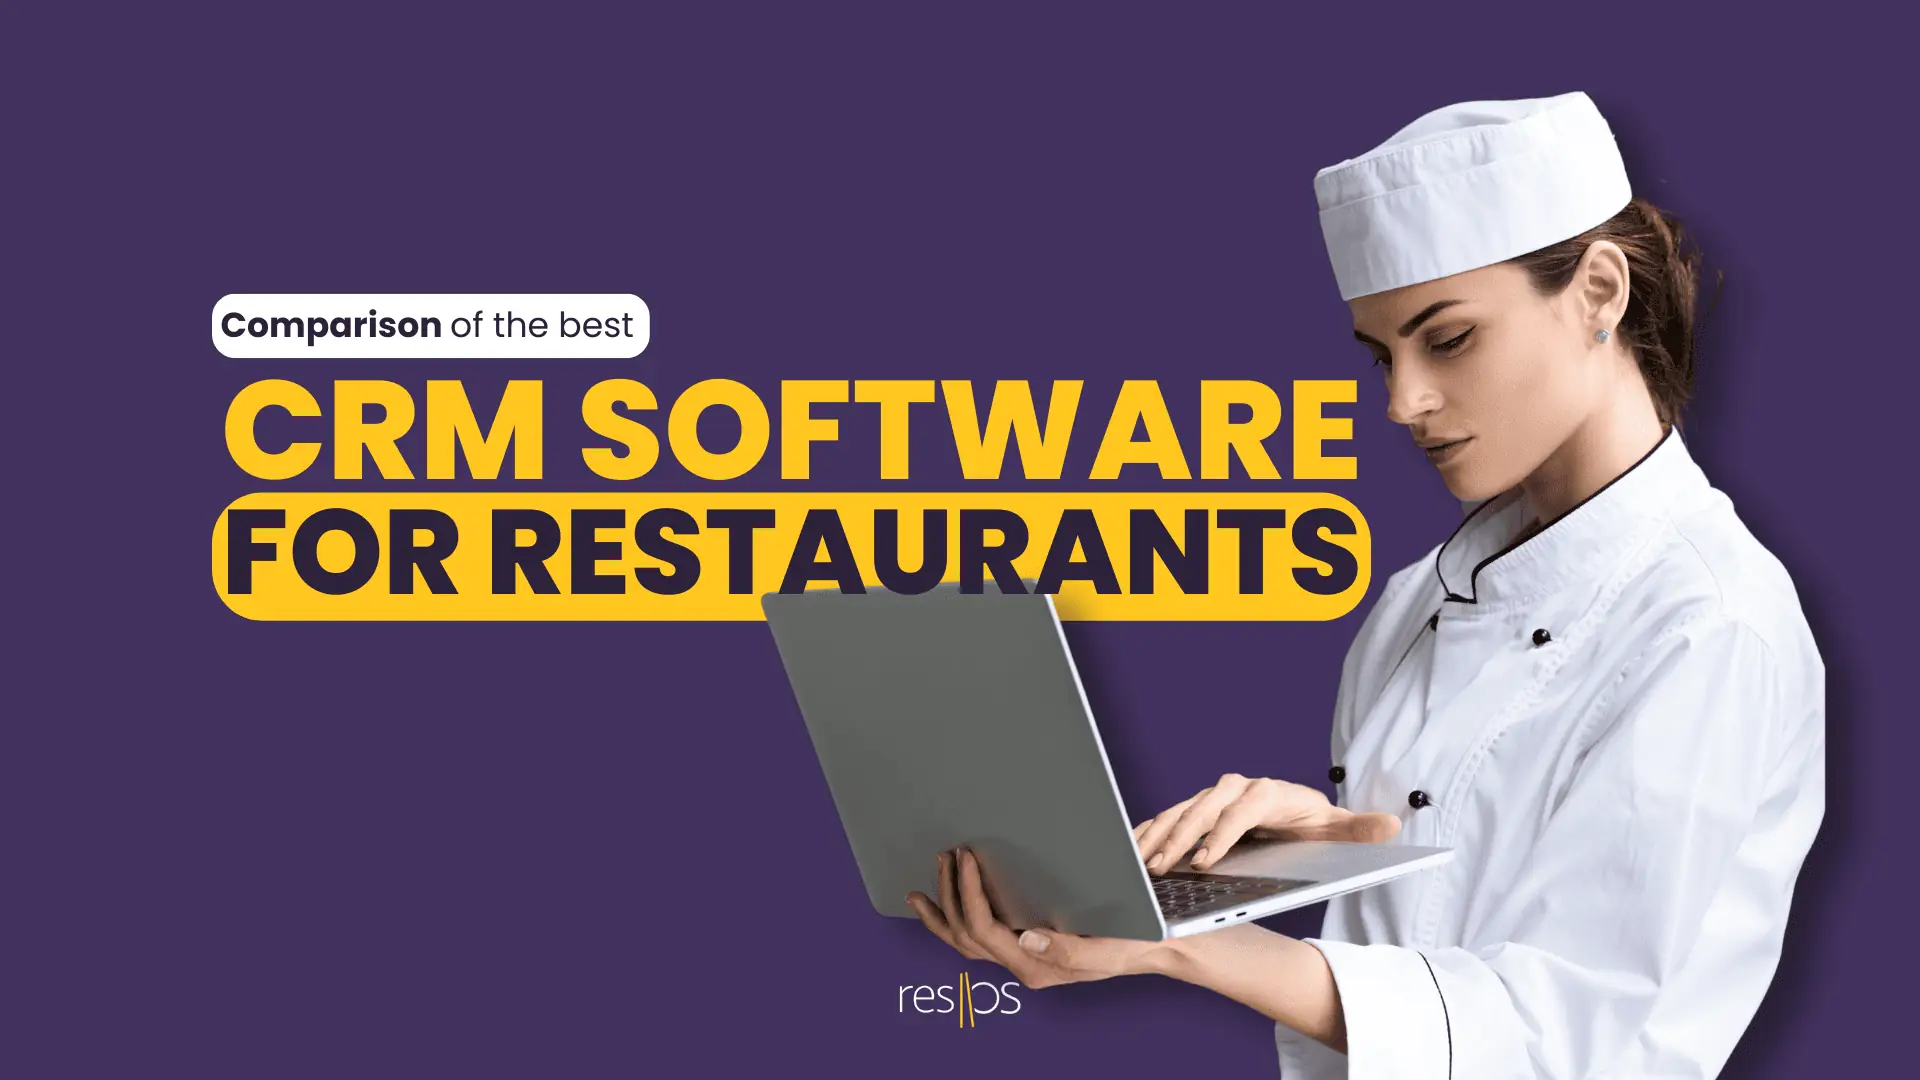 The best CRM software for restaurants – compared